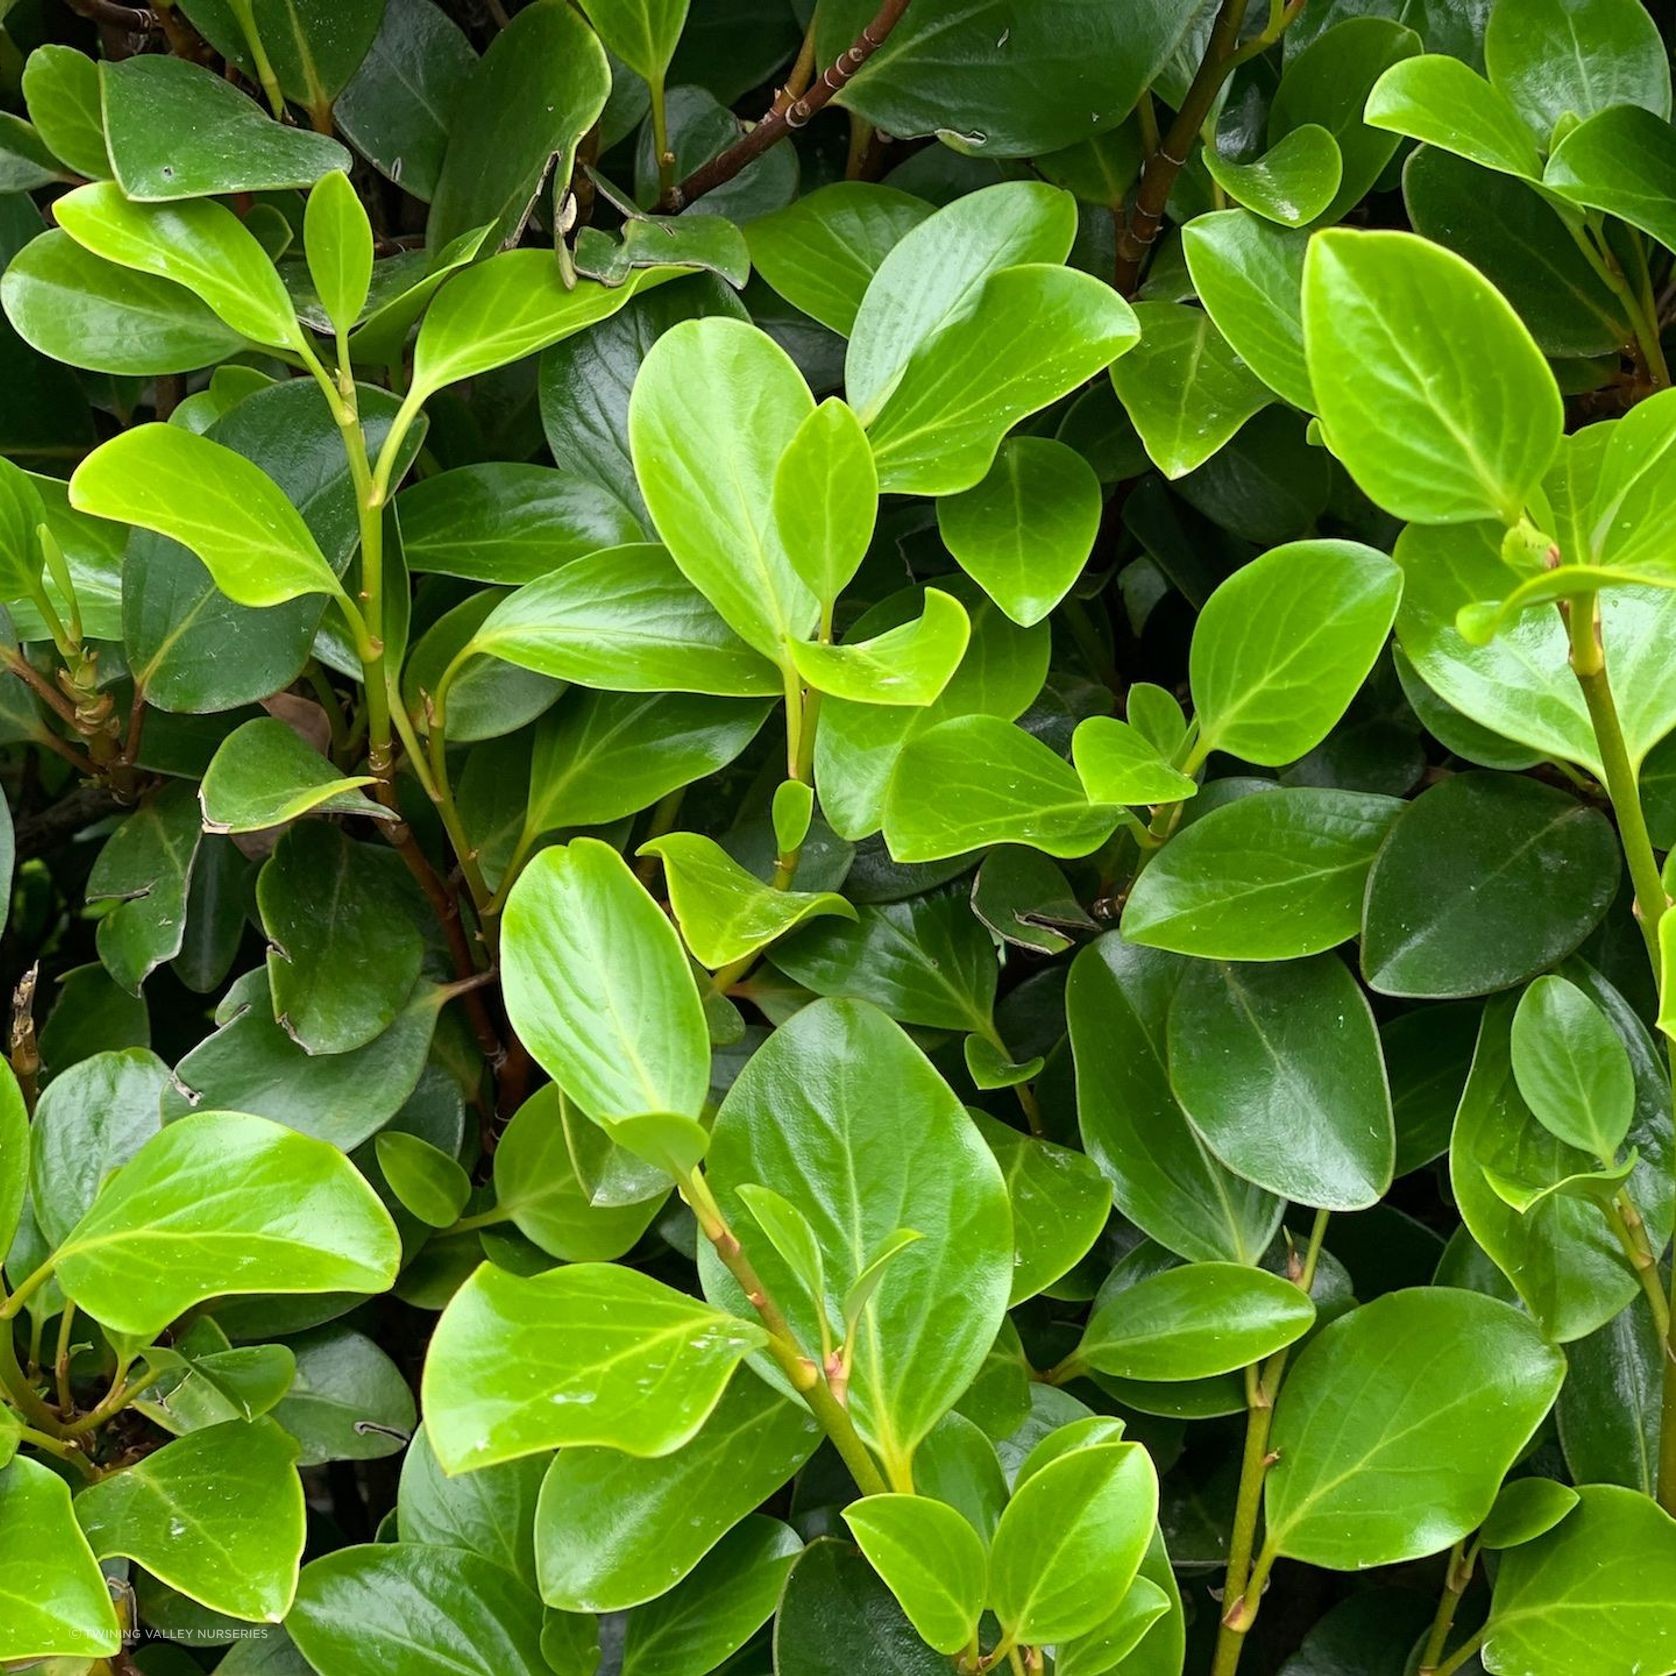 Griselinia 'Canterbury' instant hedge. gallery detail image